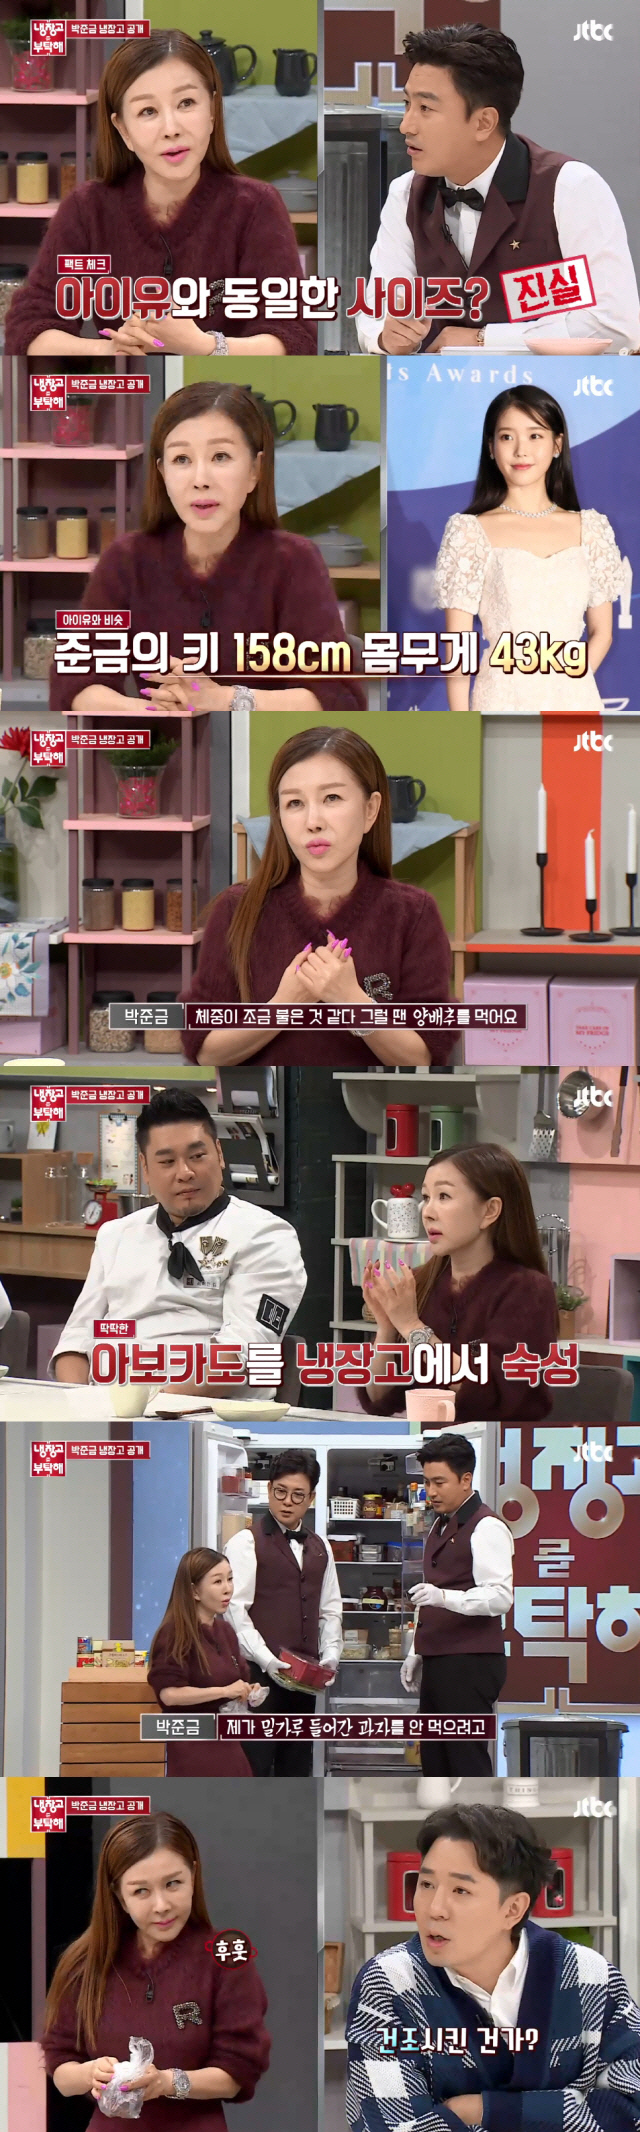 Size like 158, 43kg and IU, Park Jun-geums stunning body management secret was revealed.Actor Park Jun-geum and broadcaster Boom appeared on JTBC Take Care of the Refrigerator broadcast on the 28th.Especially on this day, Park Jun-geum attracted attention by revealing the thorough beauty habits for the slim body from the behind-the-scenes role of the top stars.Park Jun-geum said MC Kim Sung-joo is a top star guaranteed mother.Hyun Bin, Lee Min-ho, Choi Jin-hyuk, Ju Ji-hoon, etc. He said, There are friends who have come well, and there are friends who have met me well. Asked if he had an impressive son, he admired Lee Min-hos appearance and said, Hes handsome in close proximity, and handsome in the distance.Ju Ji-hoon has wit. As soon as he sees it, he says, Can I call you sister? Ill call you teacher? Its so attractive.I said, I like my sister, and from then on, I became a sister.Park Jun-geum revealed his amazing body specifications by saying he was 1m58 tall and 43kg in weight; he wears clothes the same size as IU.Park Jun-geum, who likes sweet food enough to like Chochung, said, I like sweetness, but I am trying to refrain from health.Park Jun-geum also says, If you think you have increased weight, you eat cabbage unconditionally. He also eats dried jujube as a substitute for cookies to avoid flour-containing cookies.I can not eat because of weight management, and there are chocolate cookies that I have for ornamental purposes. But I was off the diet for a while, enjoying the sweet and United States of America food thanks to the chefs.In the first cooking showdown on the theme of United States of America, Song Hoon chef and Raymon Kim chef confronted each other.Song Hoon chef presented meatball pasta and Raymon Kim chef presented Salisbury steak.All satisfactorily tasted, Park Jun-geum opted for a victory for Raymon Kim after agonising.In the second cooking showdown Soy sauce base dish, Chung Ho-young chef showed crab pot rice, beef soy sauce, butter seafood cream sauce nurungji risotto respectively.Park Jun-geum gave O chef a victory, saying, The rice cook is so delicious.